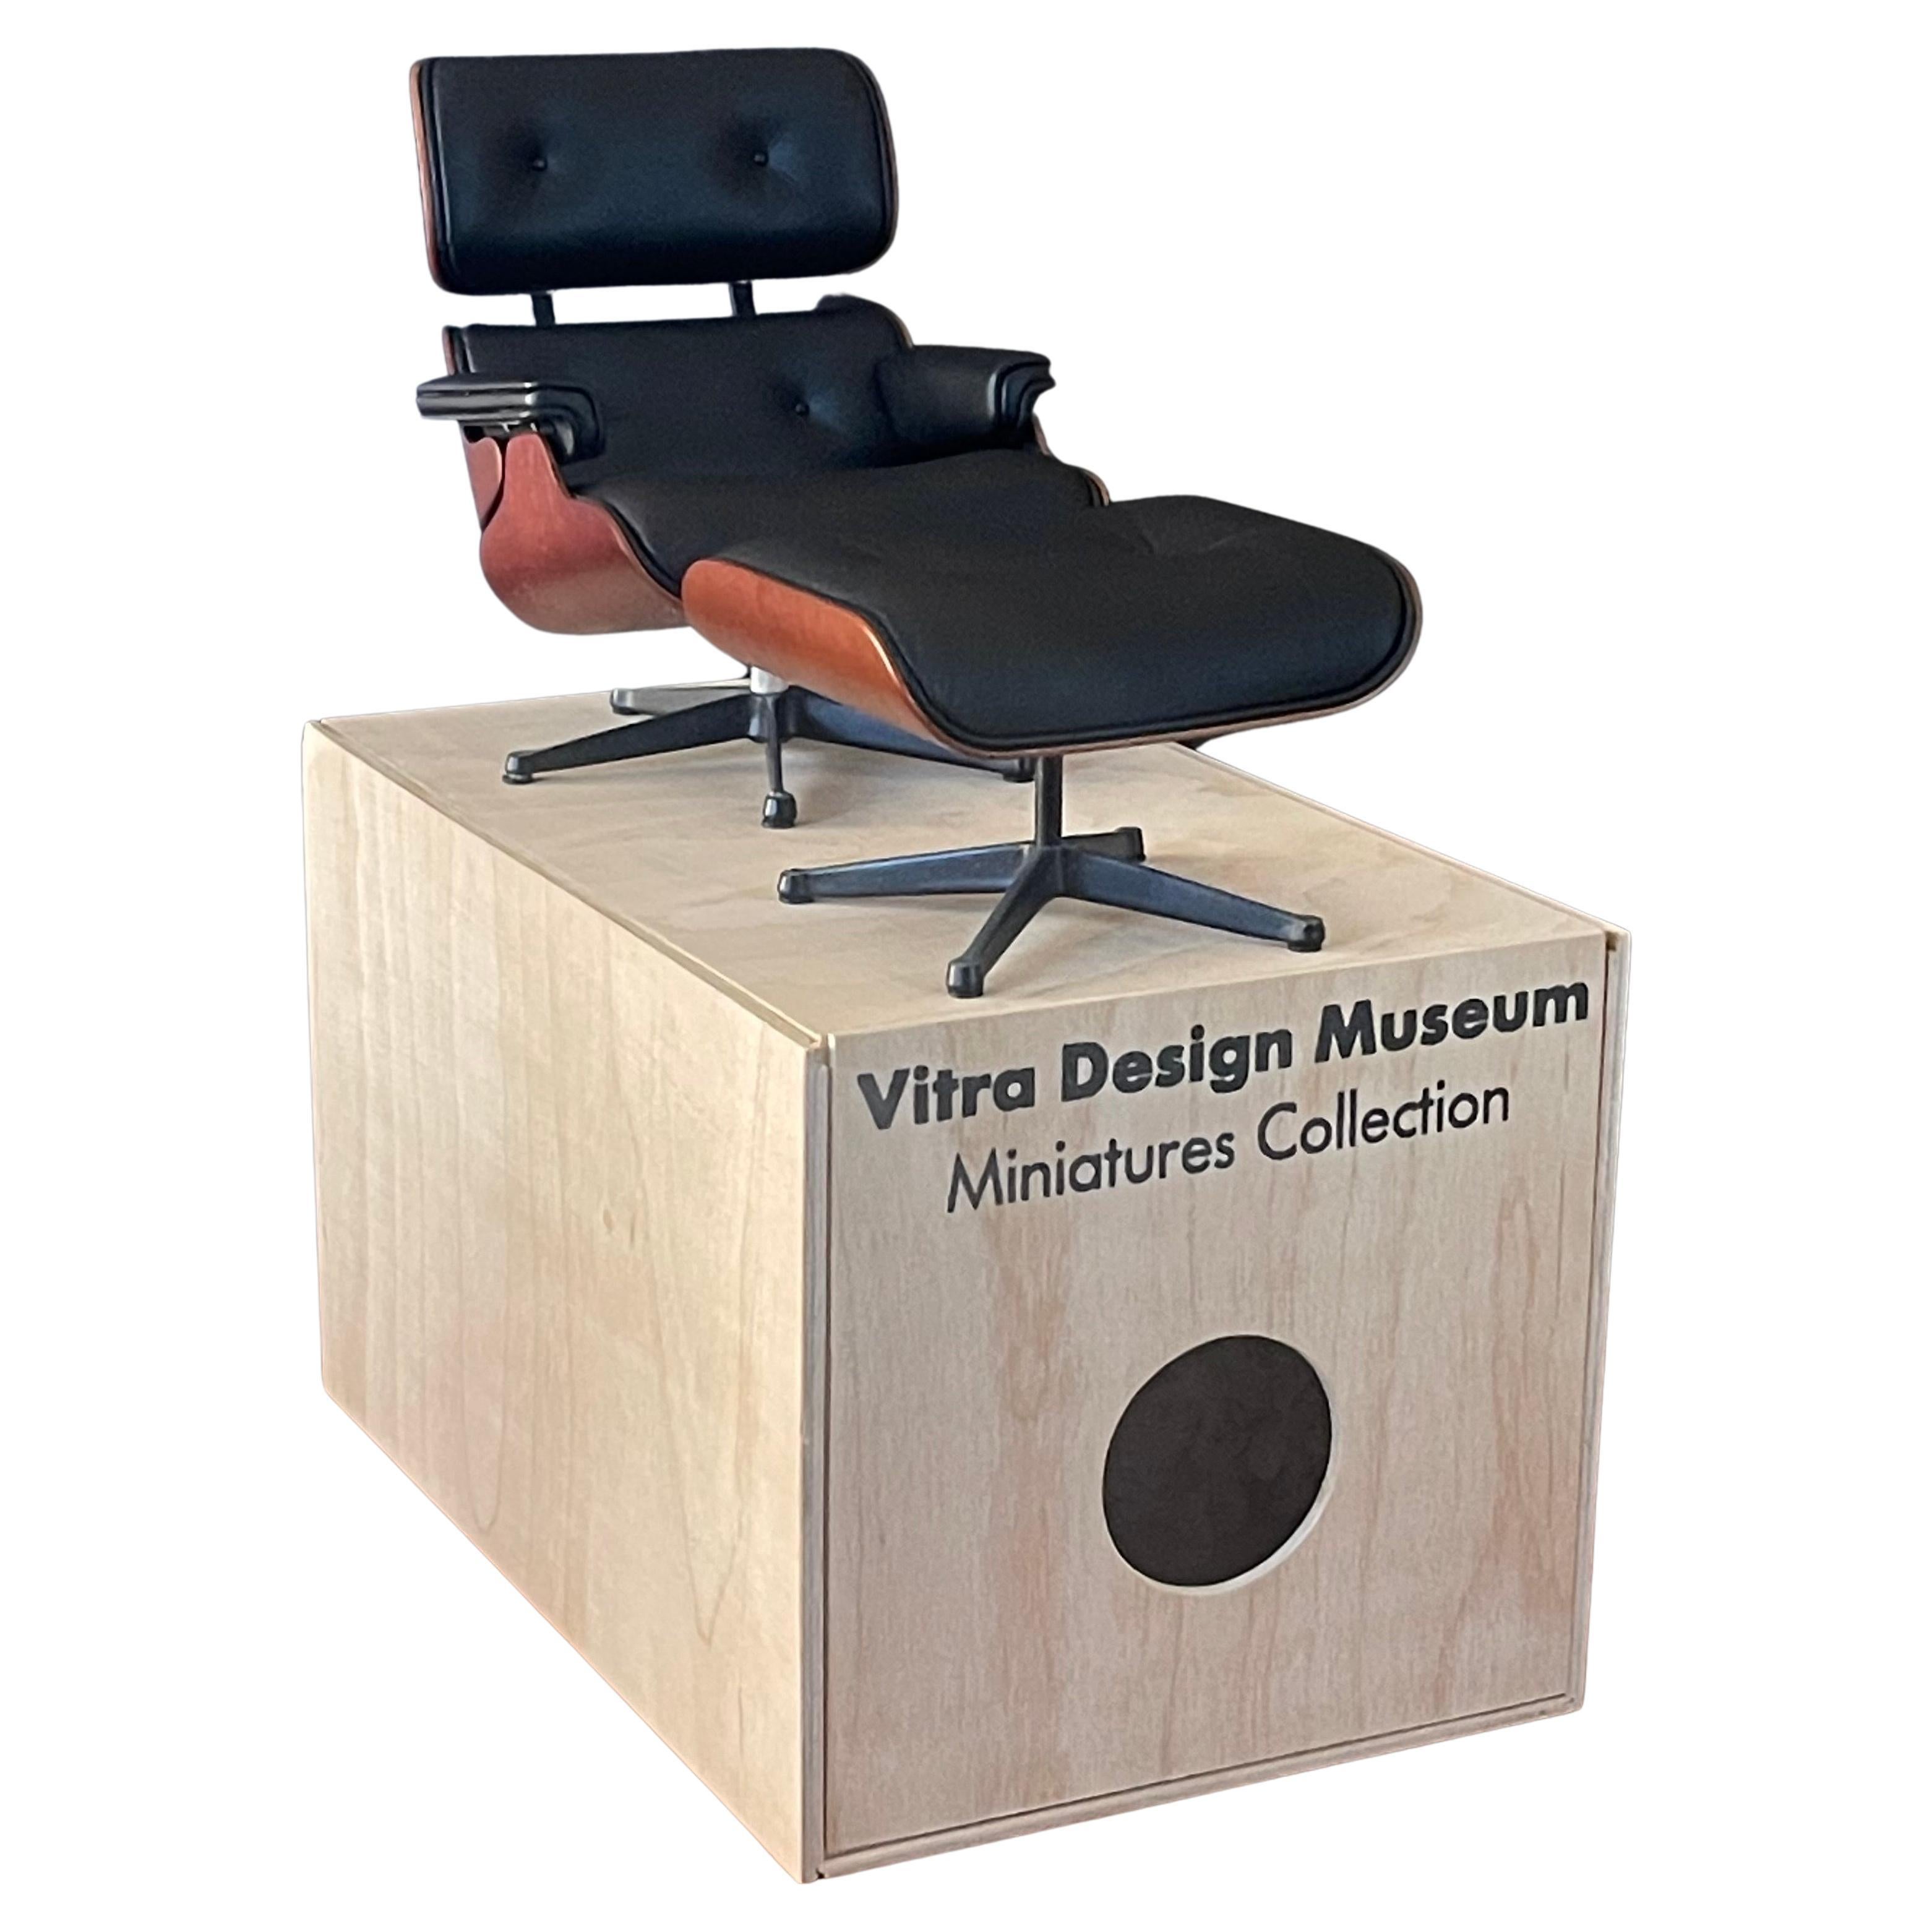 Miniature Eames lounge chair & ottoman with original box by Vitra, circa 2000s.  This super cool piece is in very good condition and measures 5.5